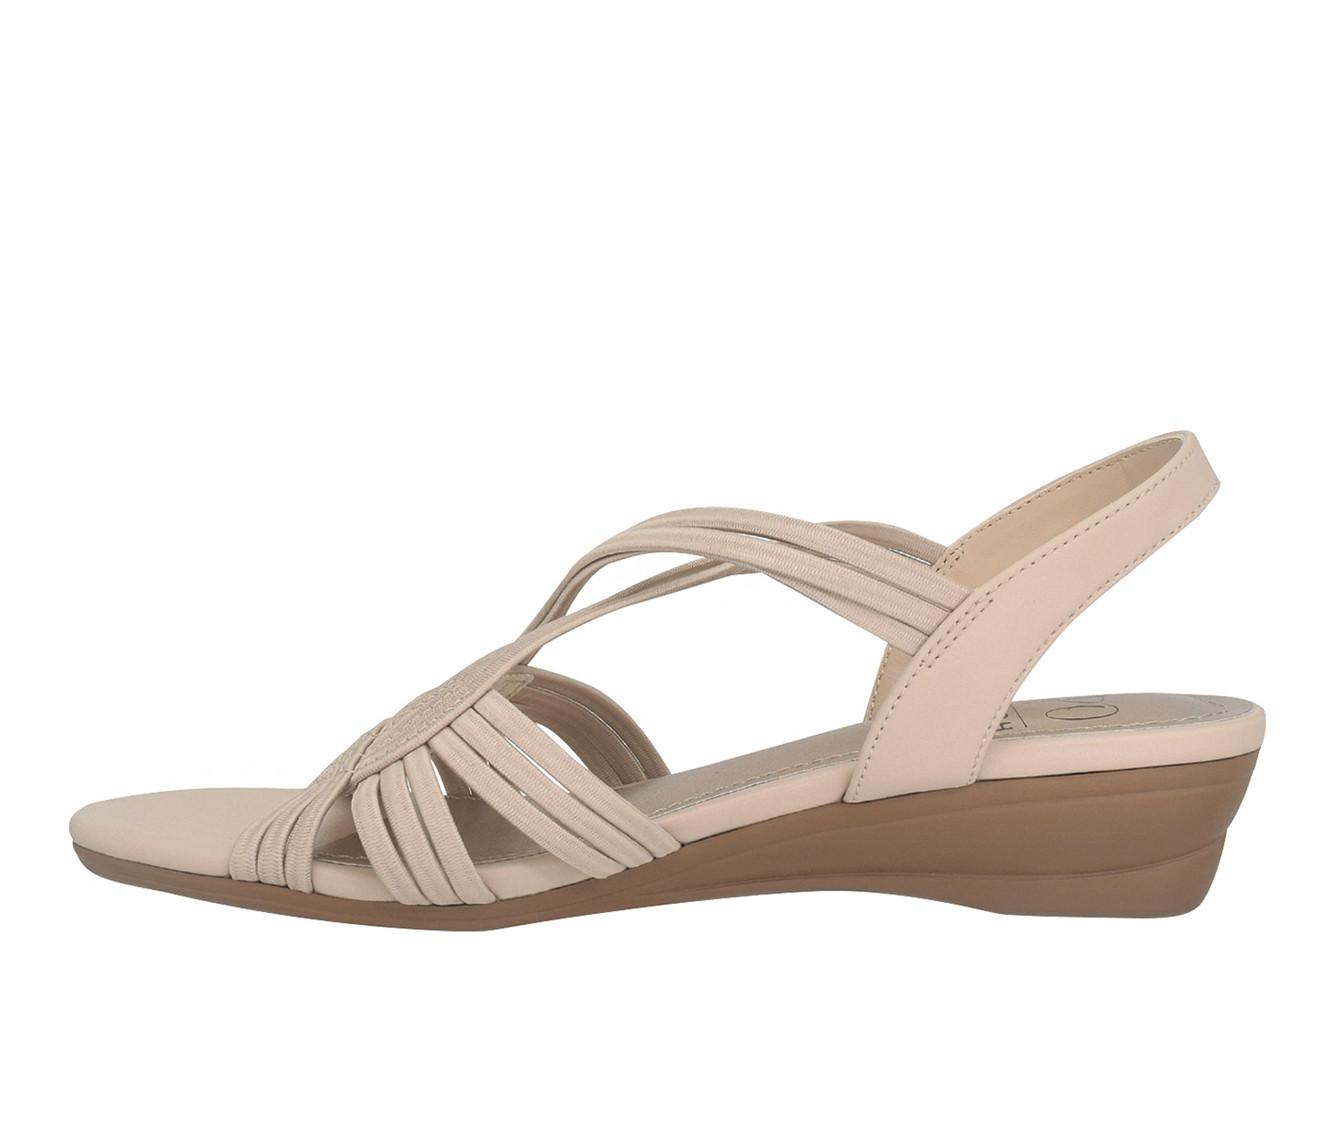 Women's Impo Remi Wedge Sandals